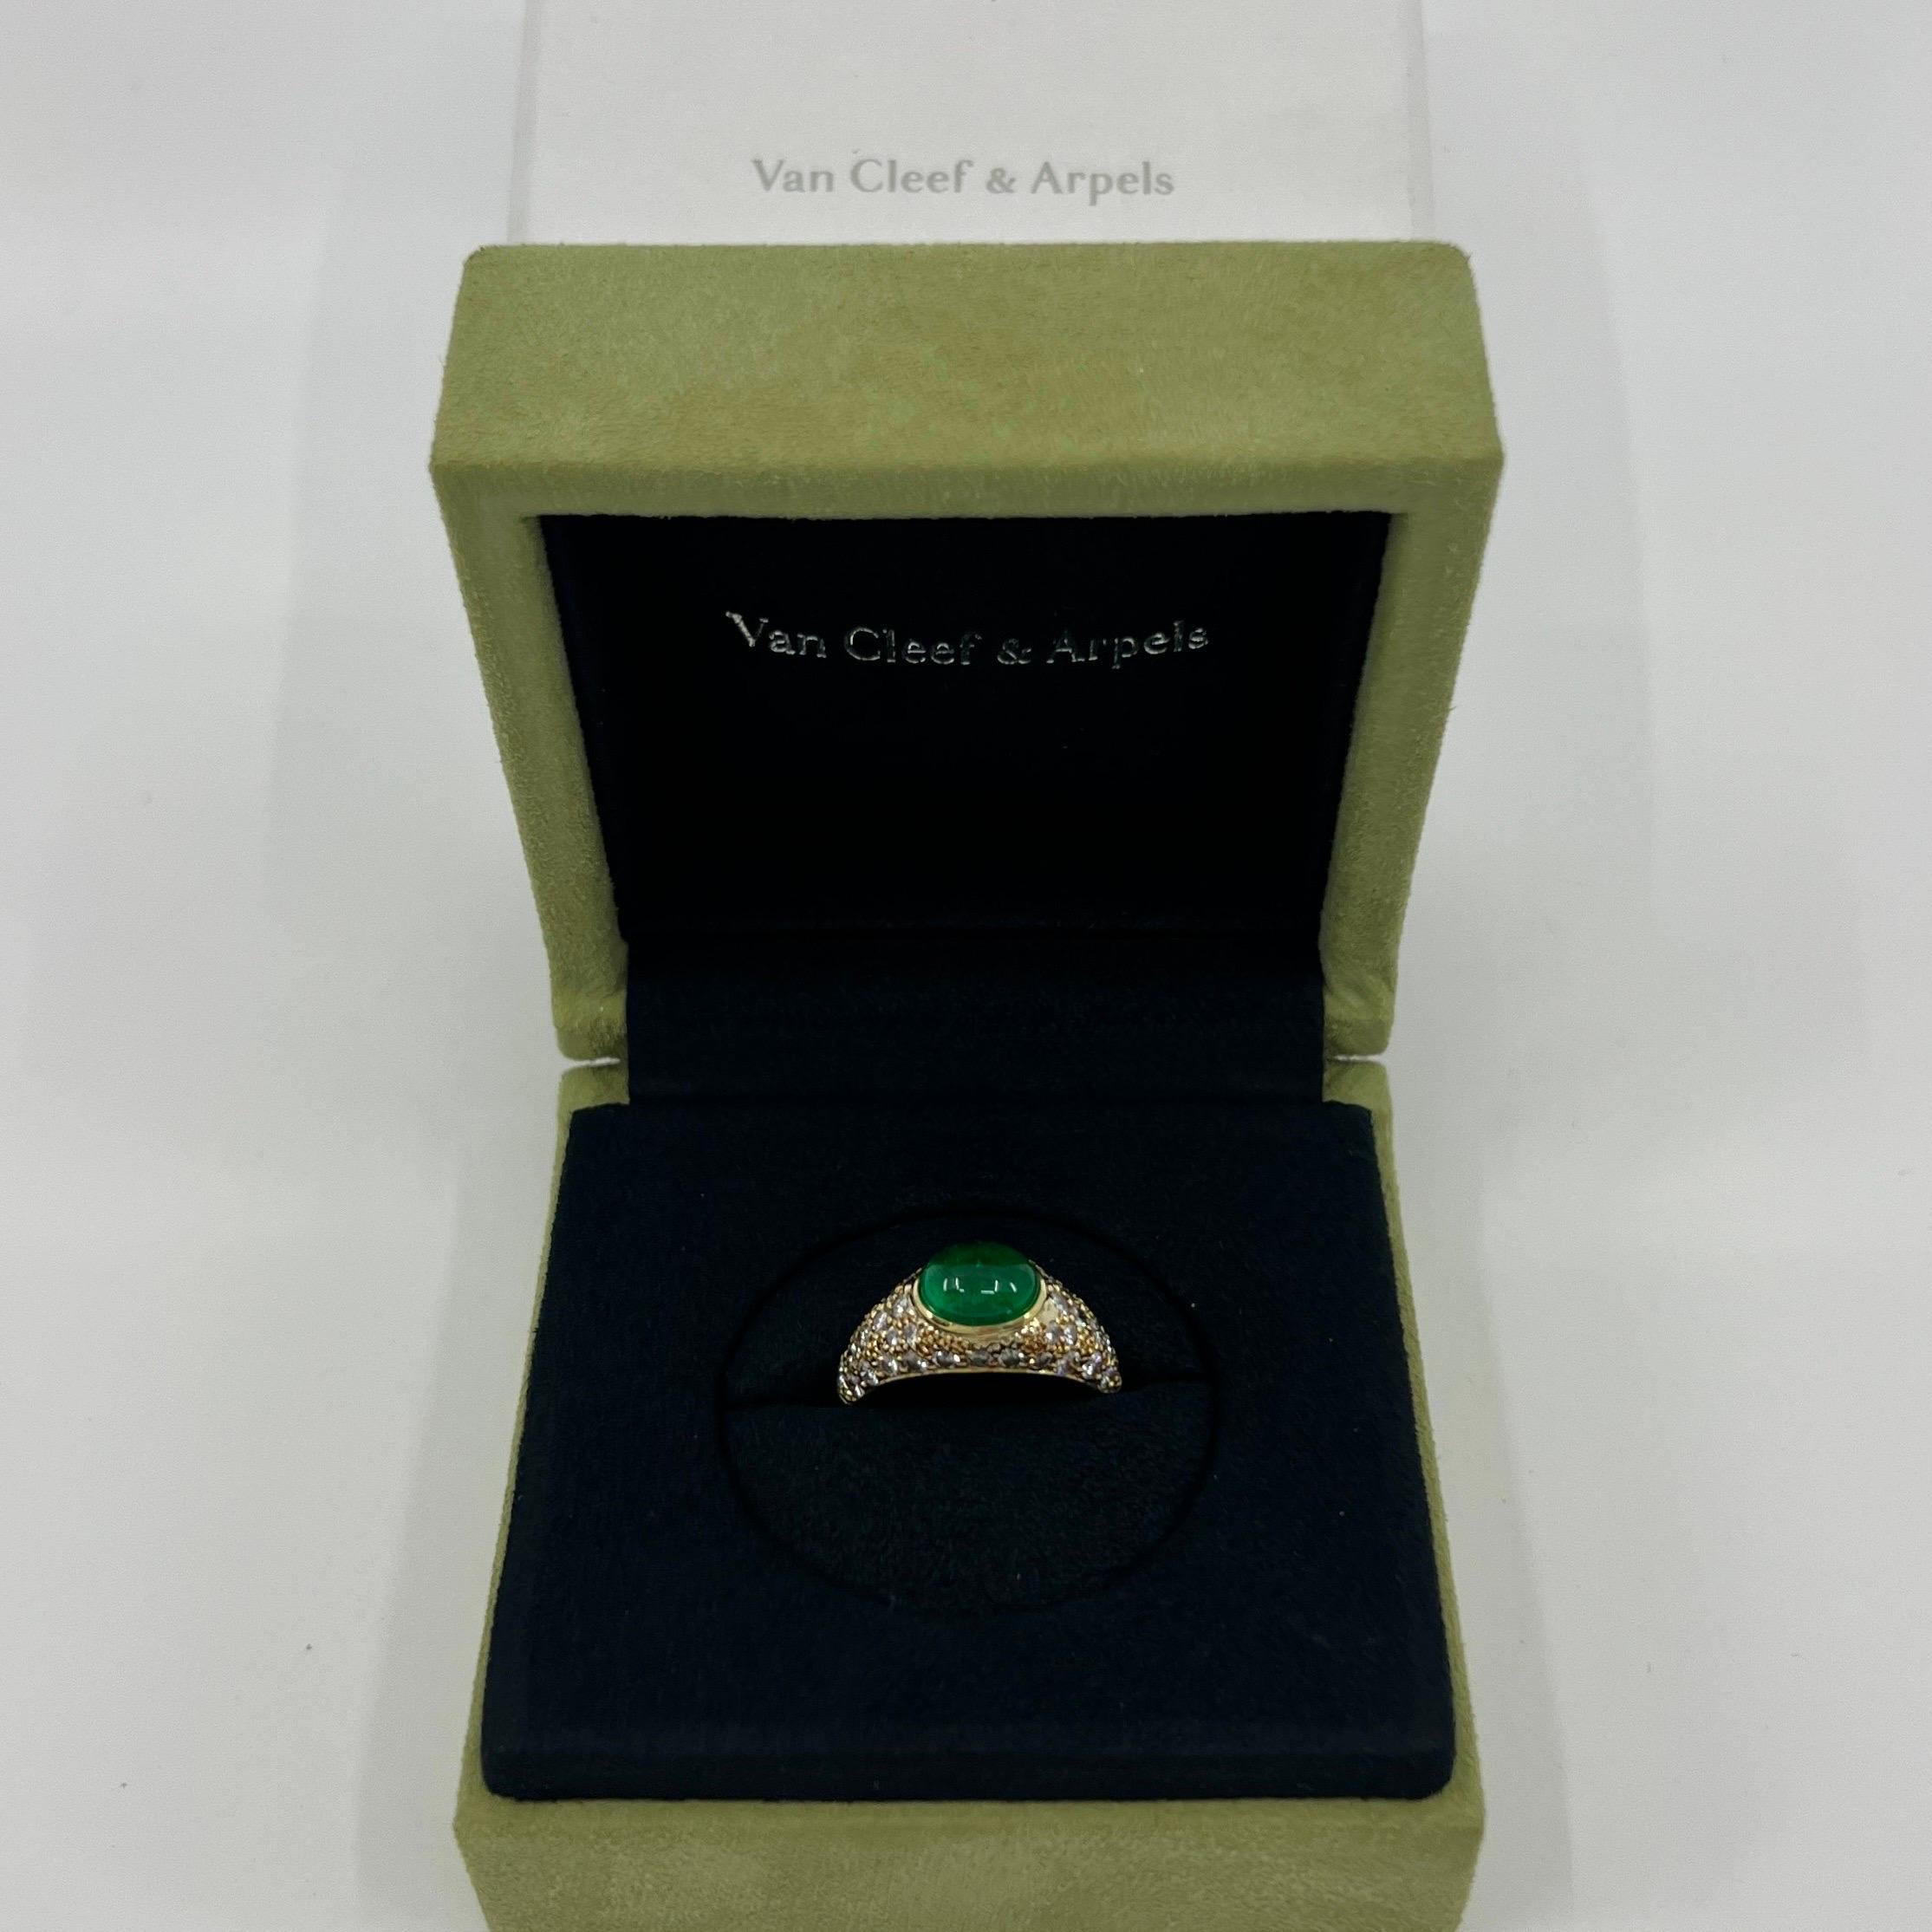 Rare Vintage Van Cleef & Arpels 2 Carat Emerald And Diamond Cocktail Dome Ring For Sale 7